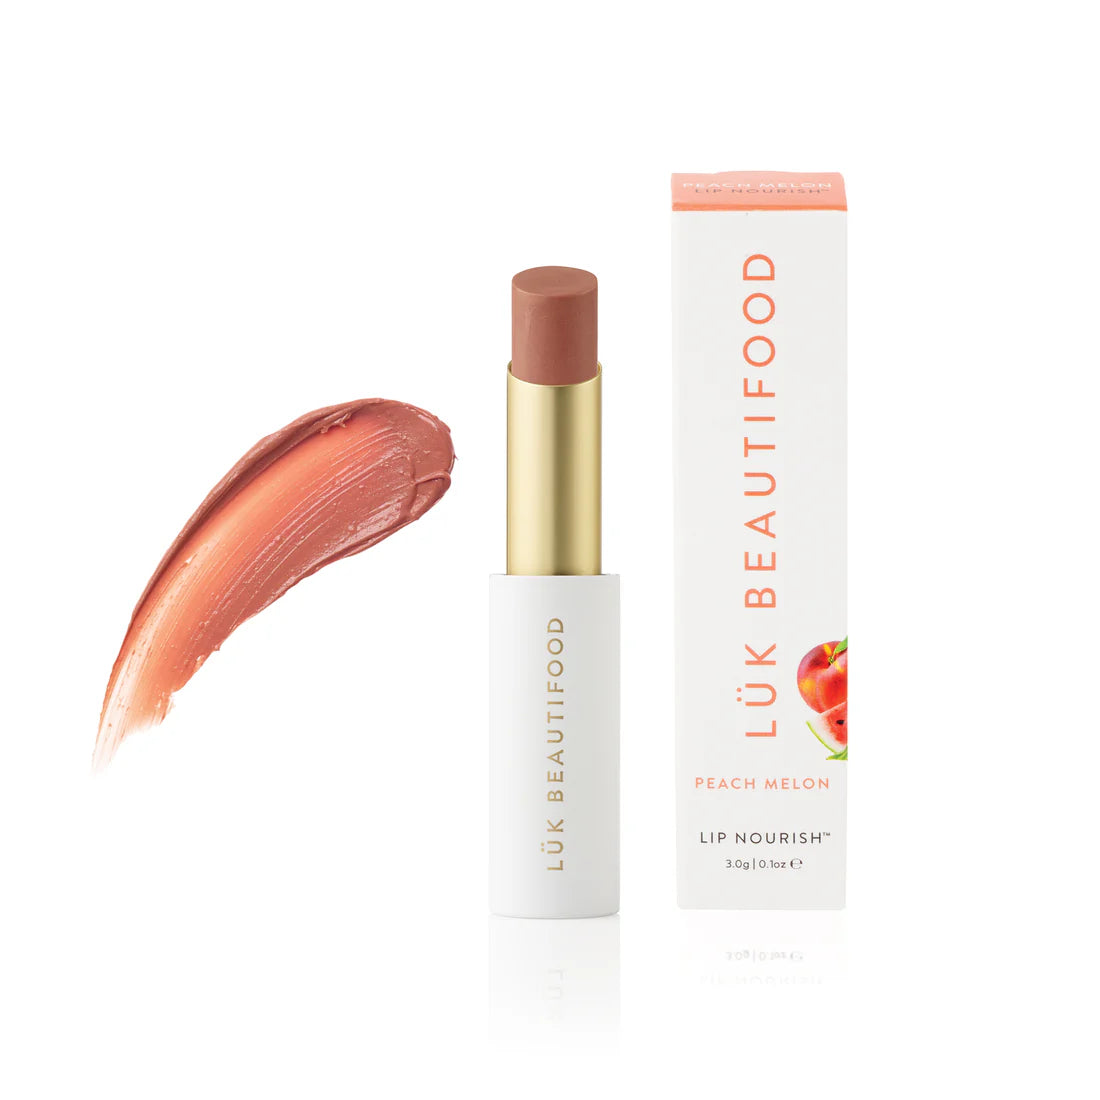 A luminous, hydrating kiss of dewy peach that gives an instant pick-me-up.  Organic cold-pressed oils from juniper berries and orange peel add fresh flavour and healing antioxidants. Soft sunshine and rich moisture in a tube.